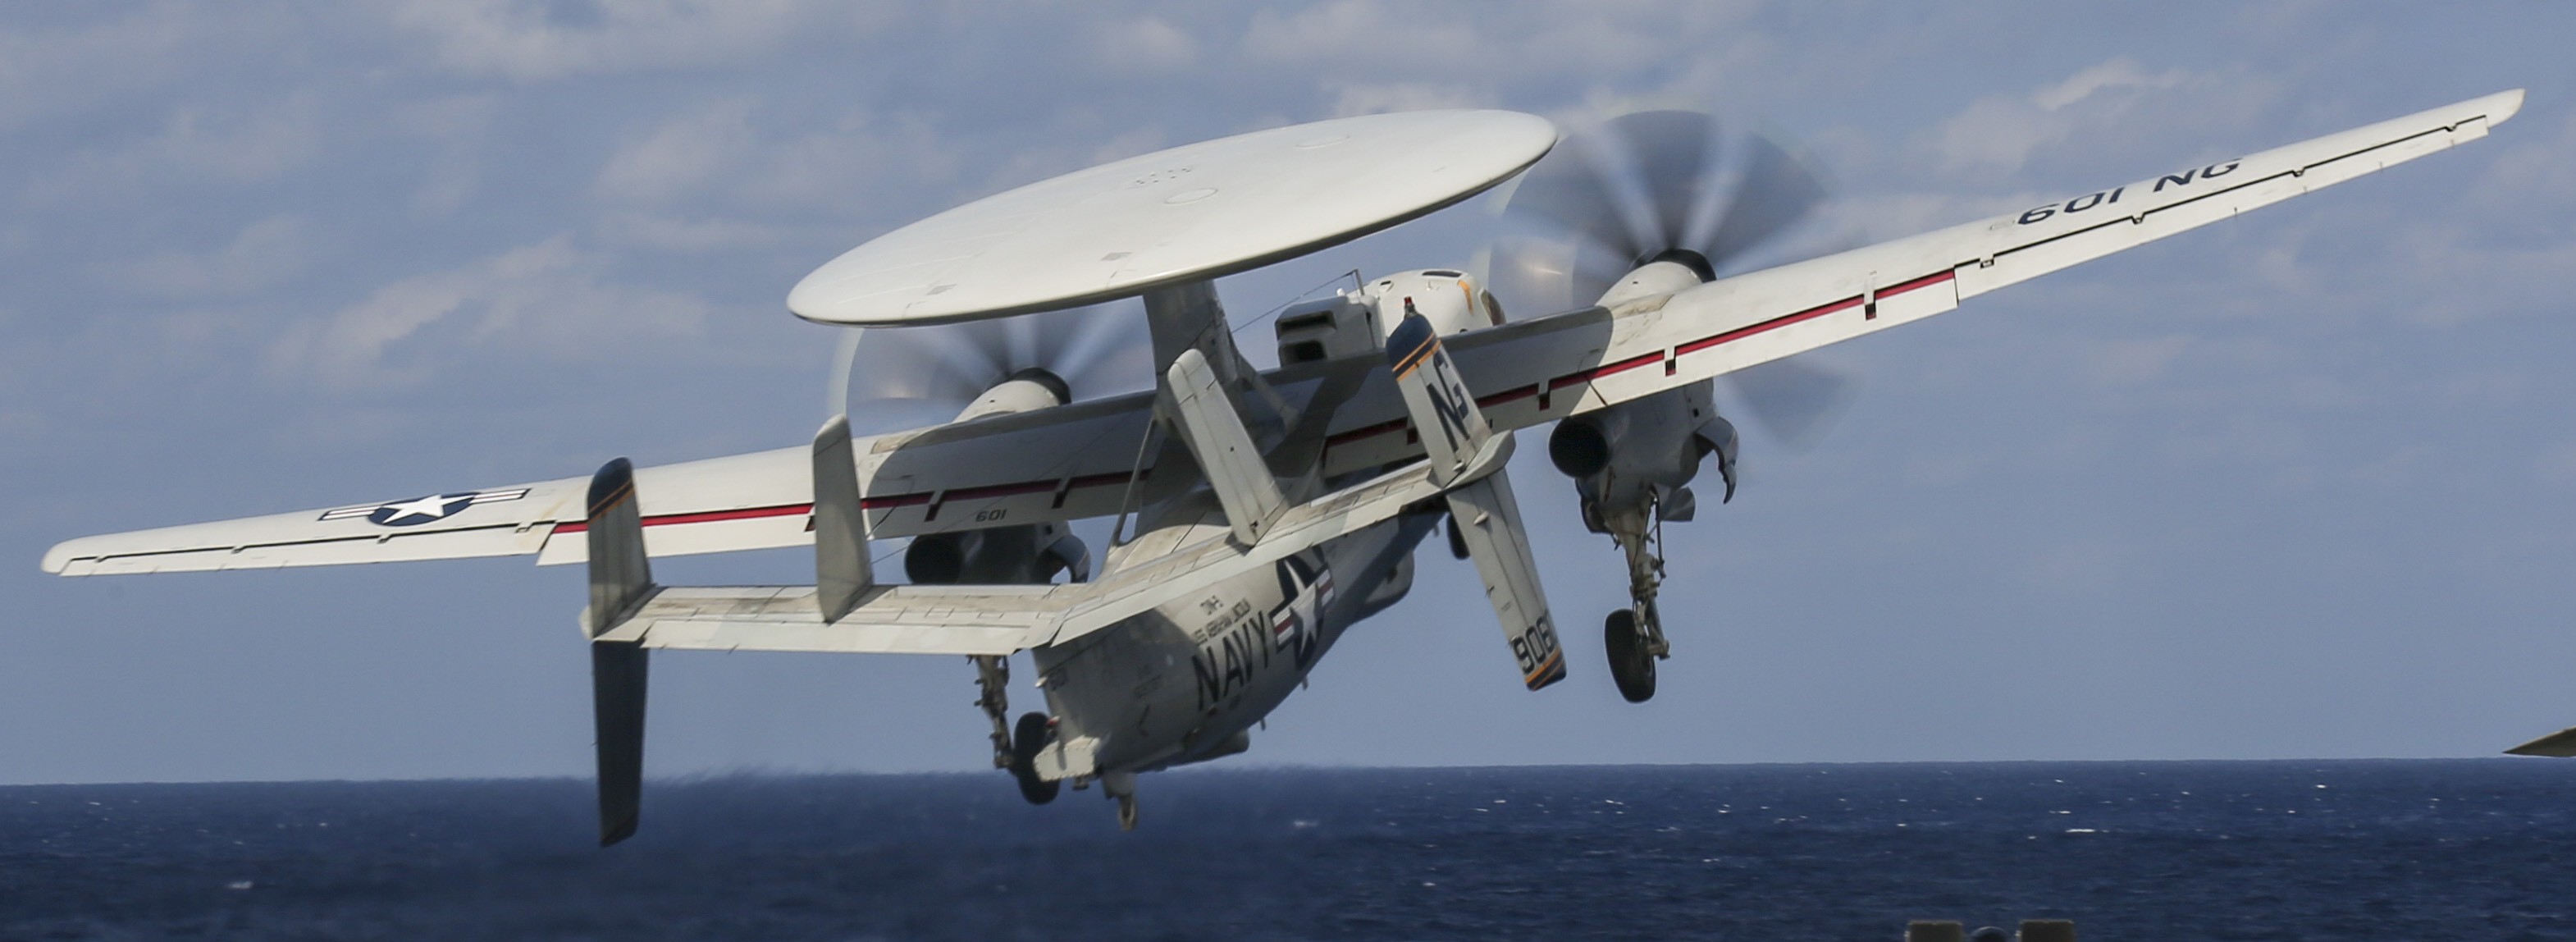 vaw-117 wallbangers airborne command and control squadron navy e-2d hawkeye cvw-9 uss abraham lincoln cvn-72 31